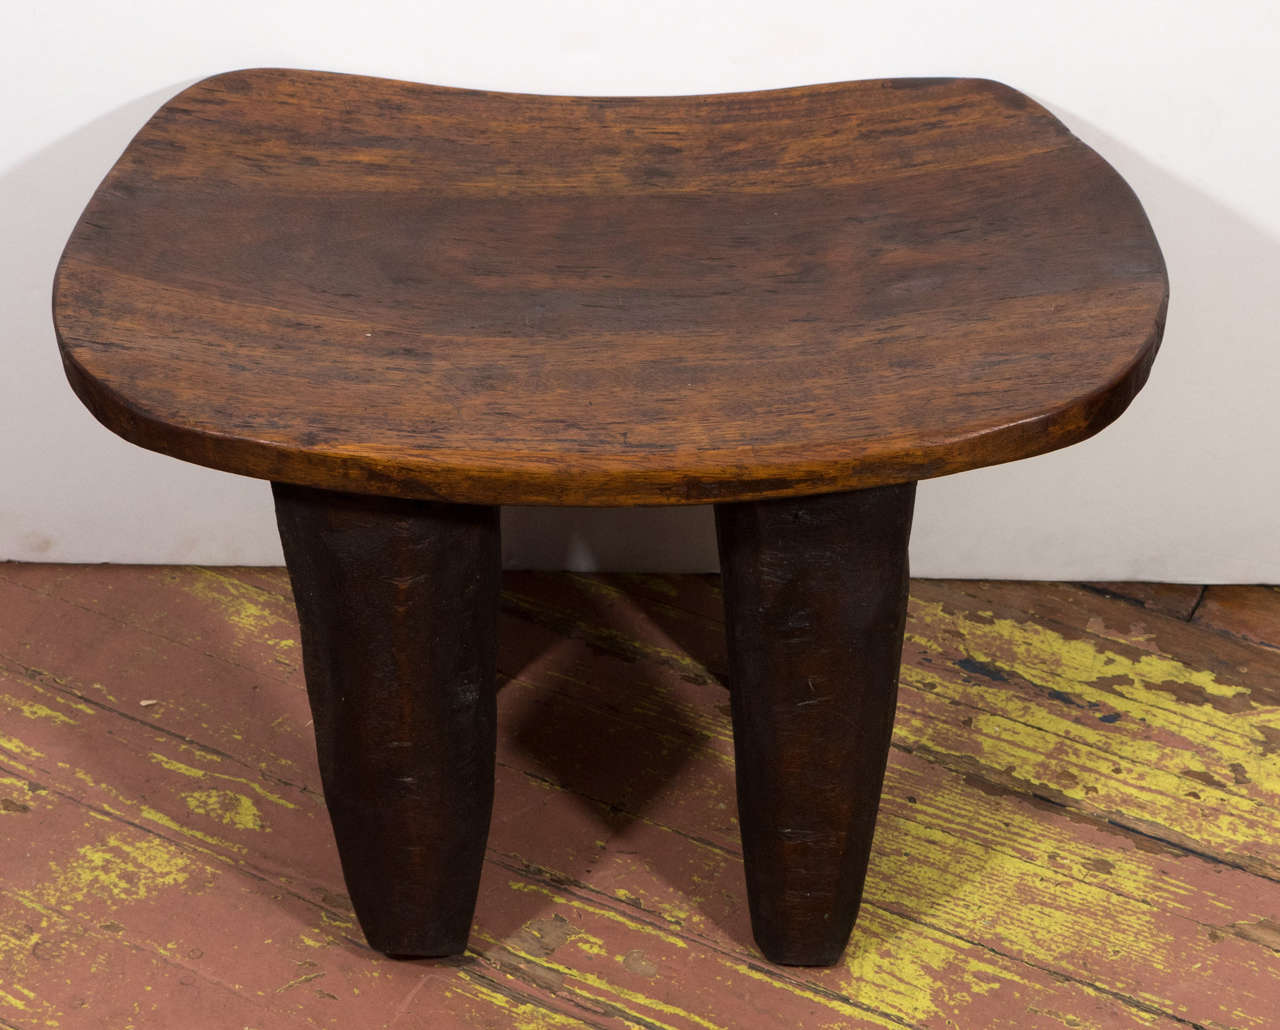 Hand-carved stool made from one solid piece of wood.